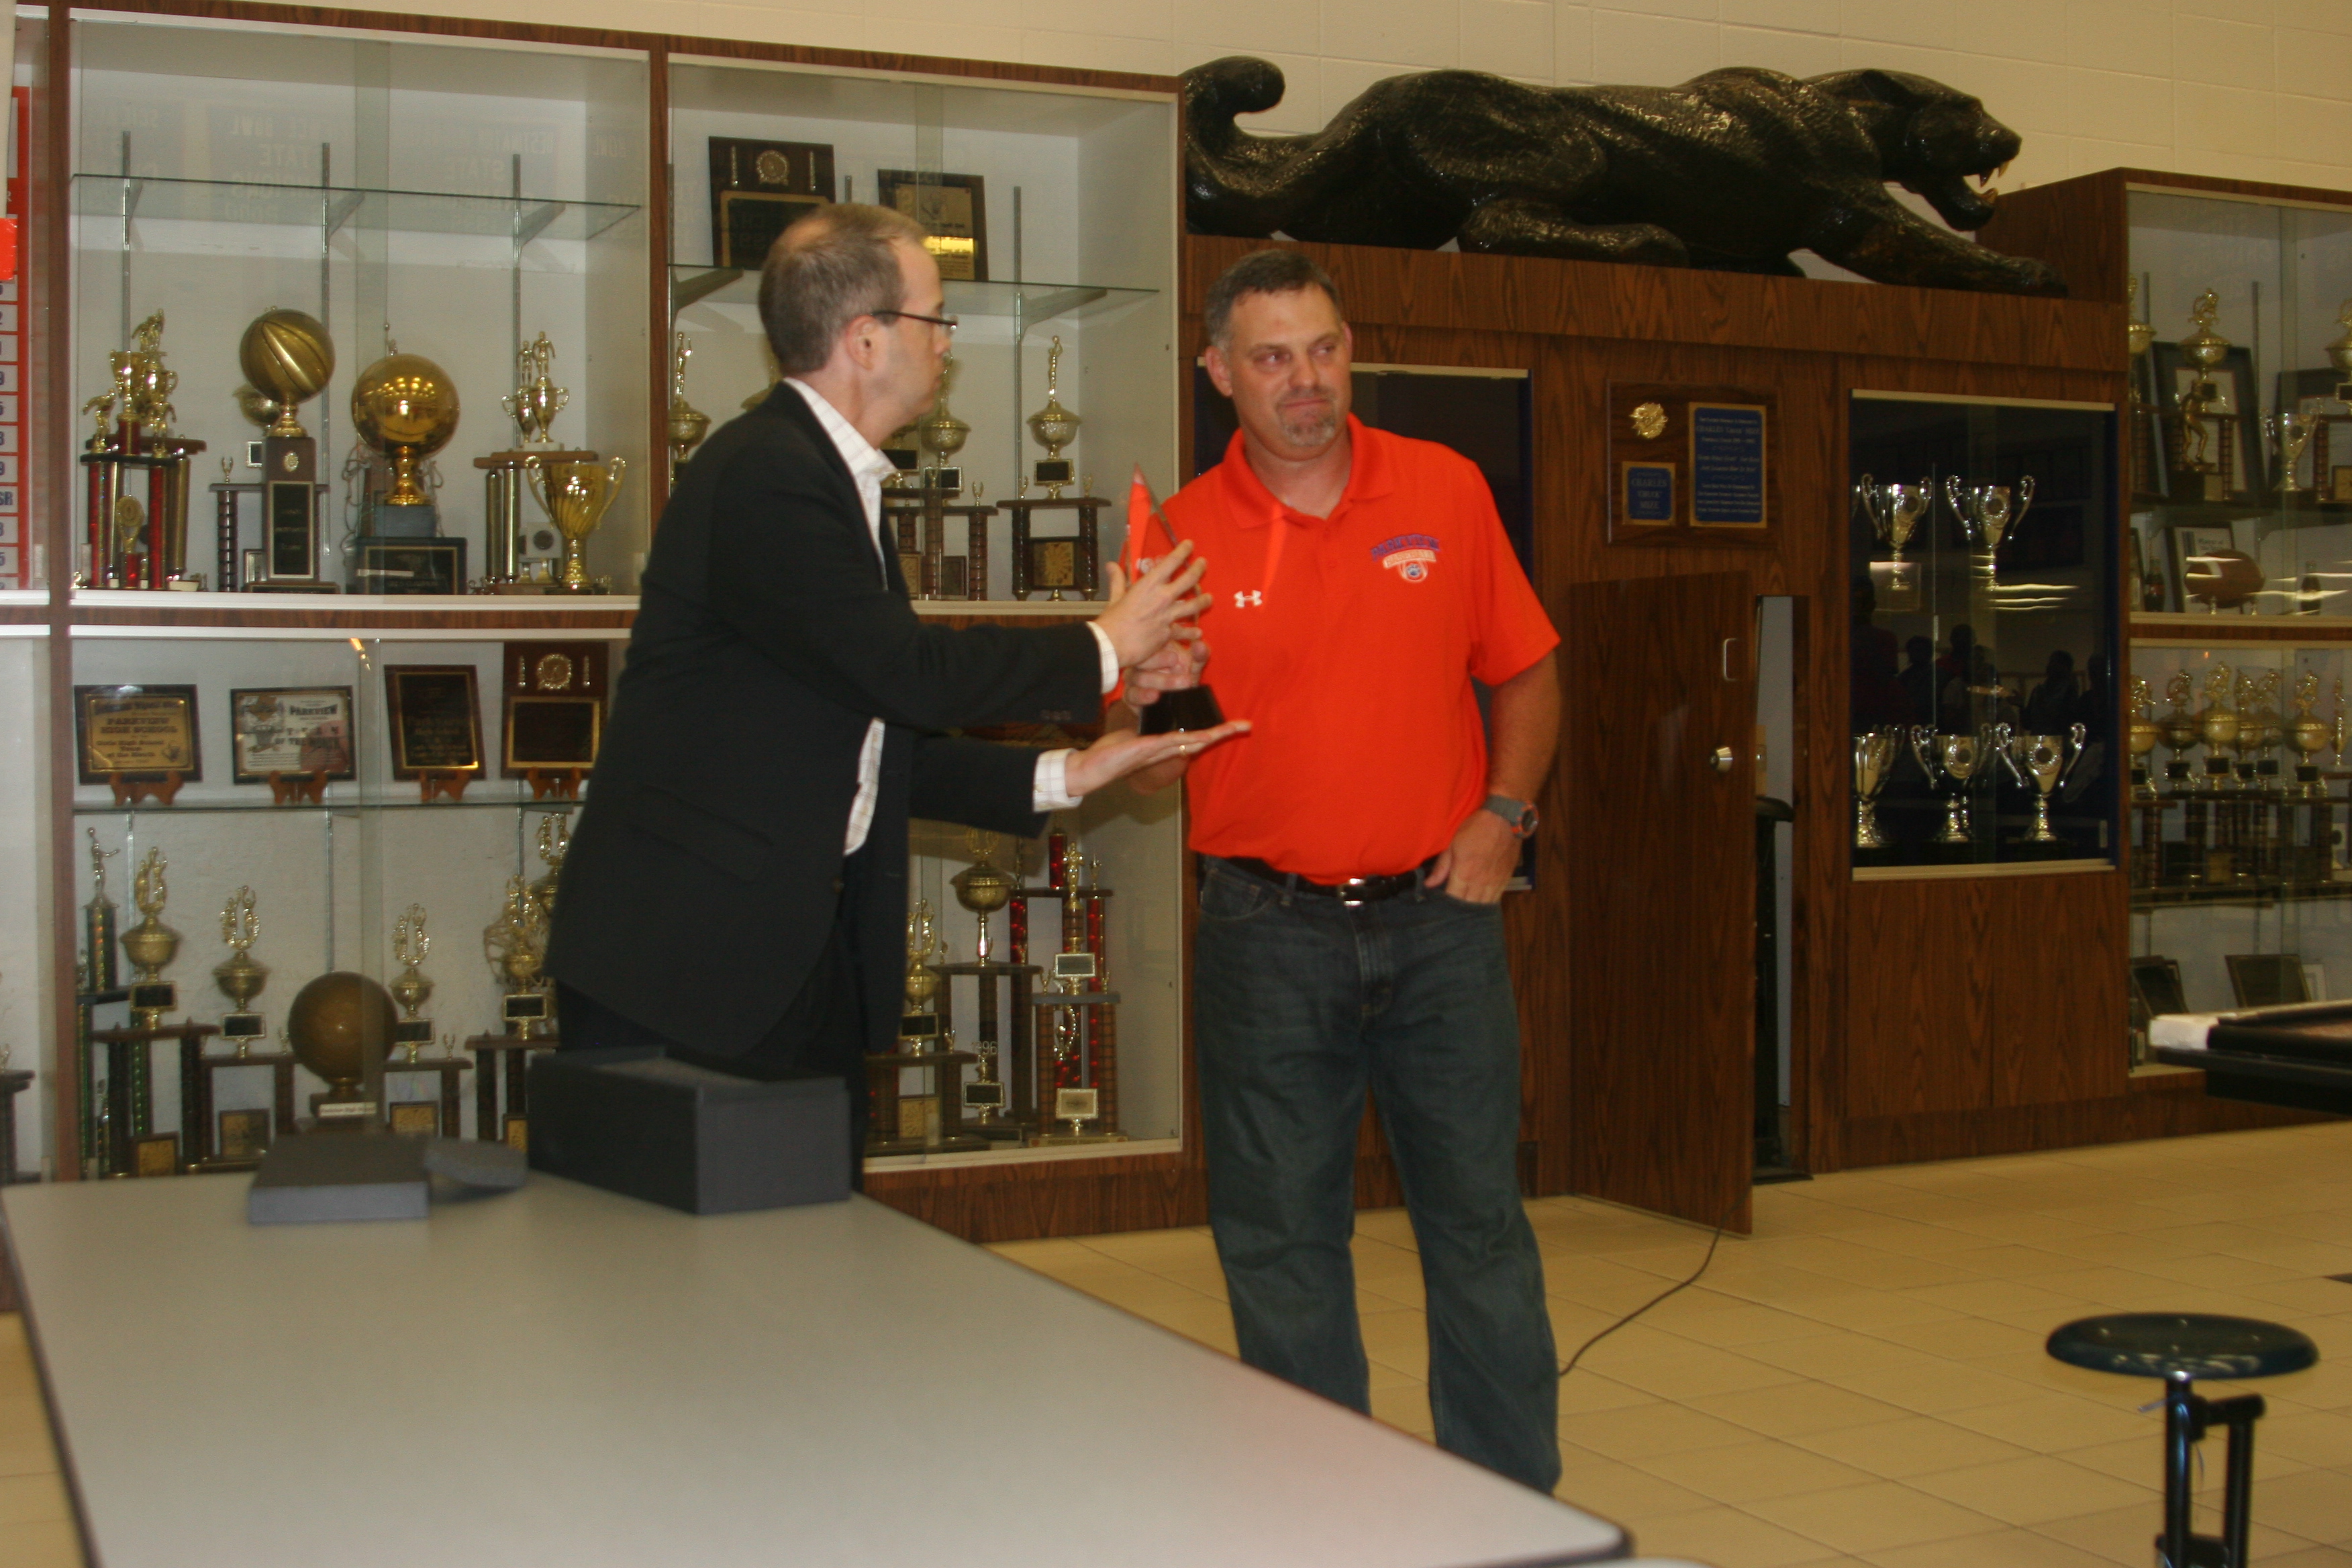 Parkview baseball coach Chan Brown receives the ALL-USA Coach of the Year trophy from Josh Barnett, director of content for USA TODAY High School Sports (Photo: Parkview High)